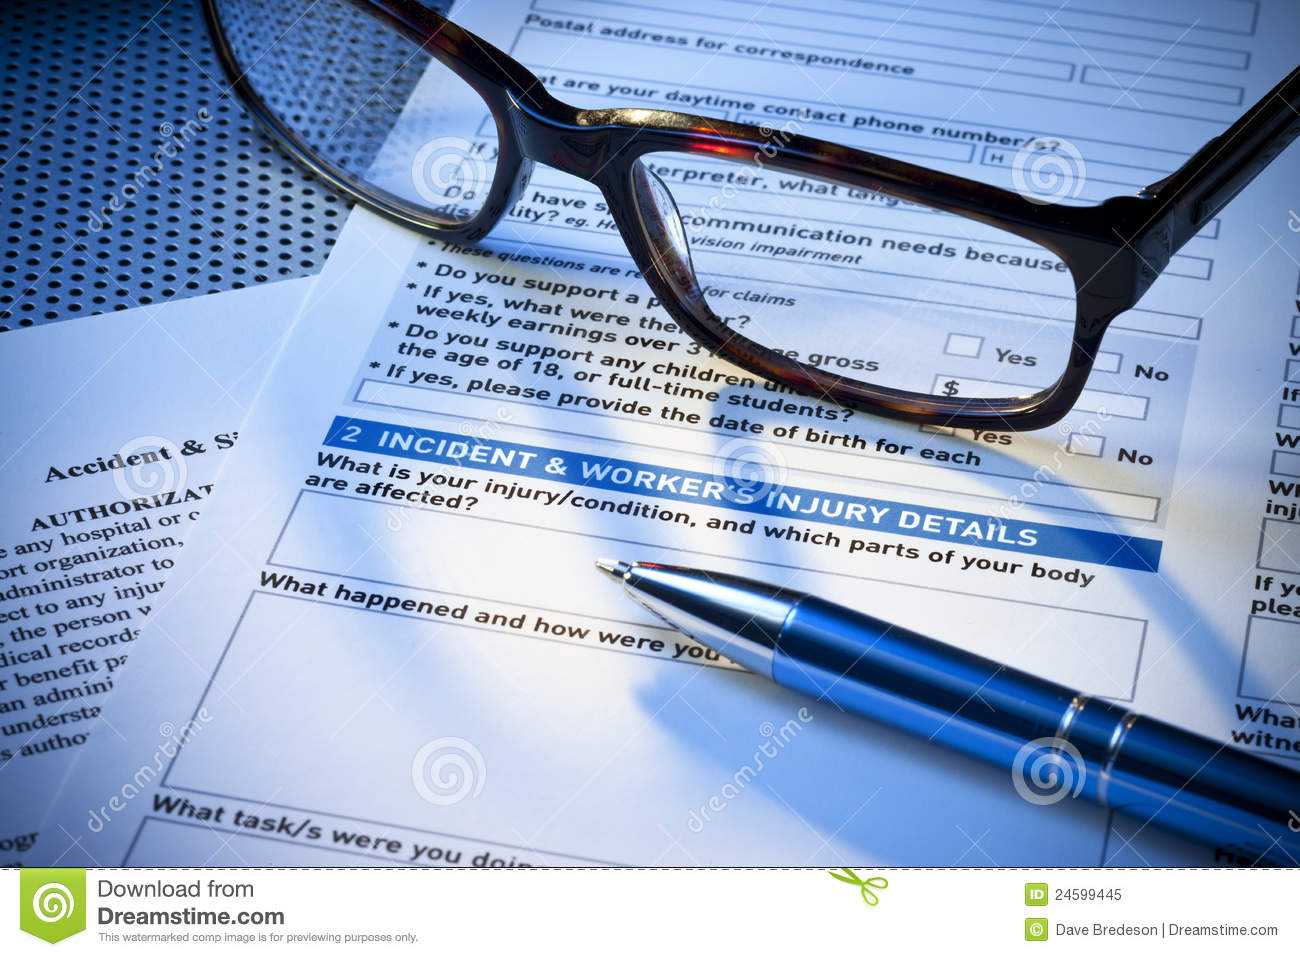 Insurance Incident Injury Work Report Form Stock Image Pertaining To Insurance Incident Report Template